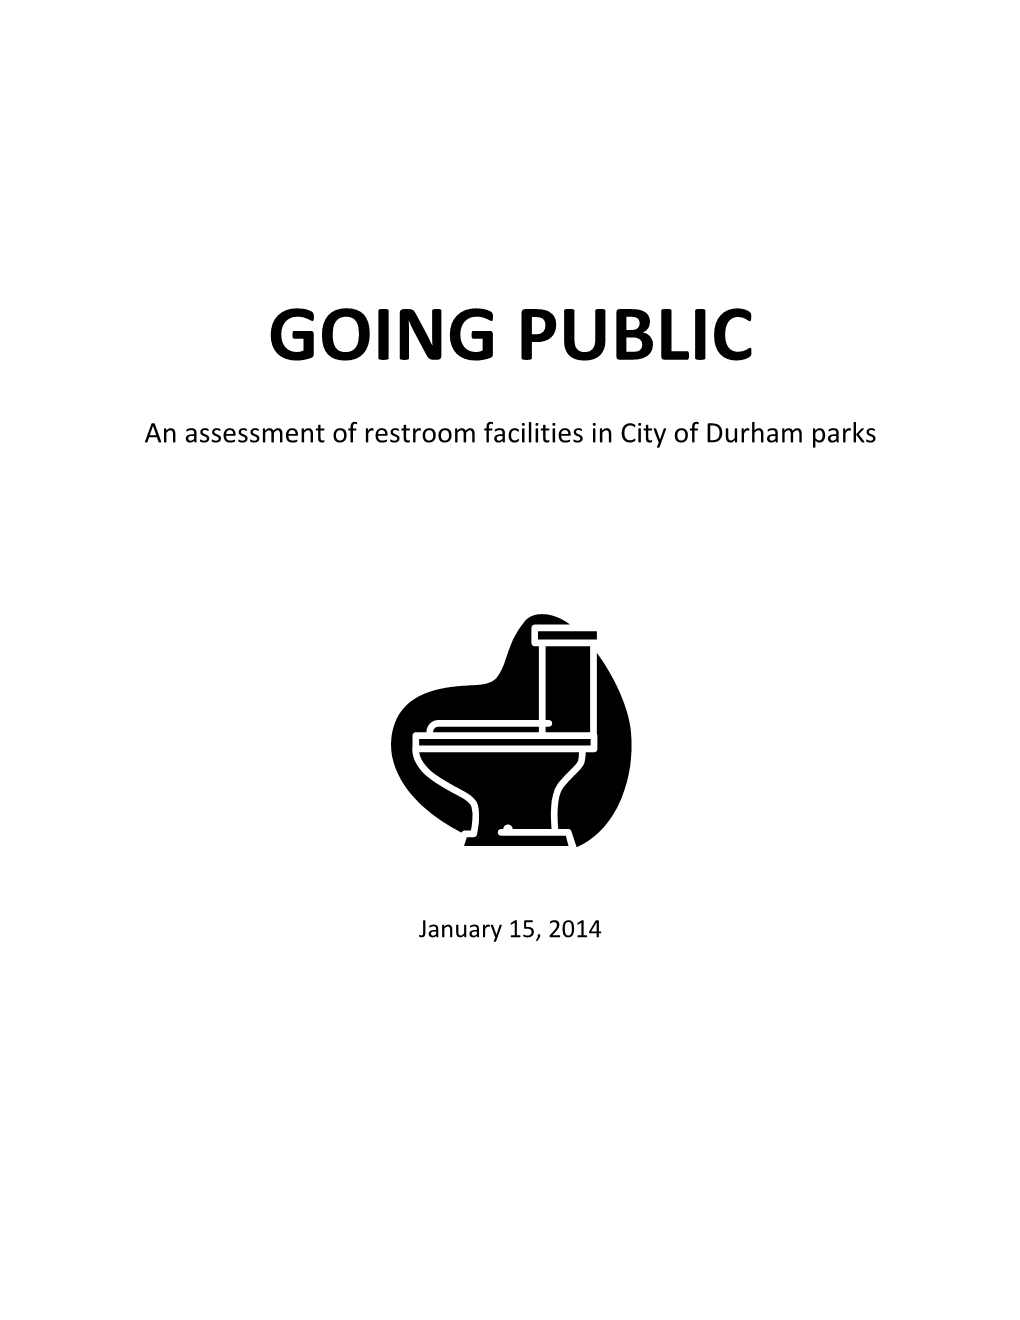 Going Public an Assessment of Restroom Facilities